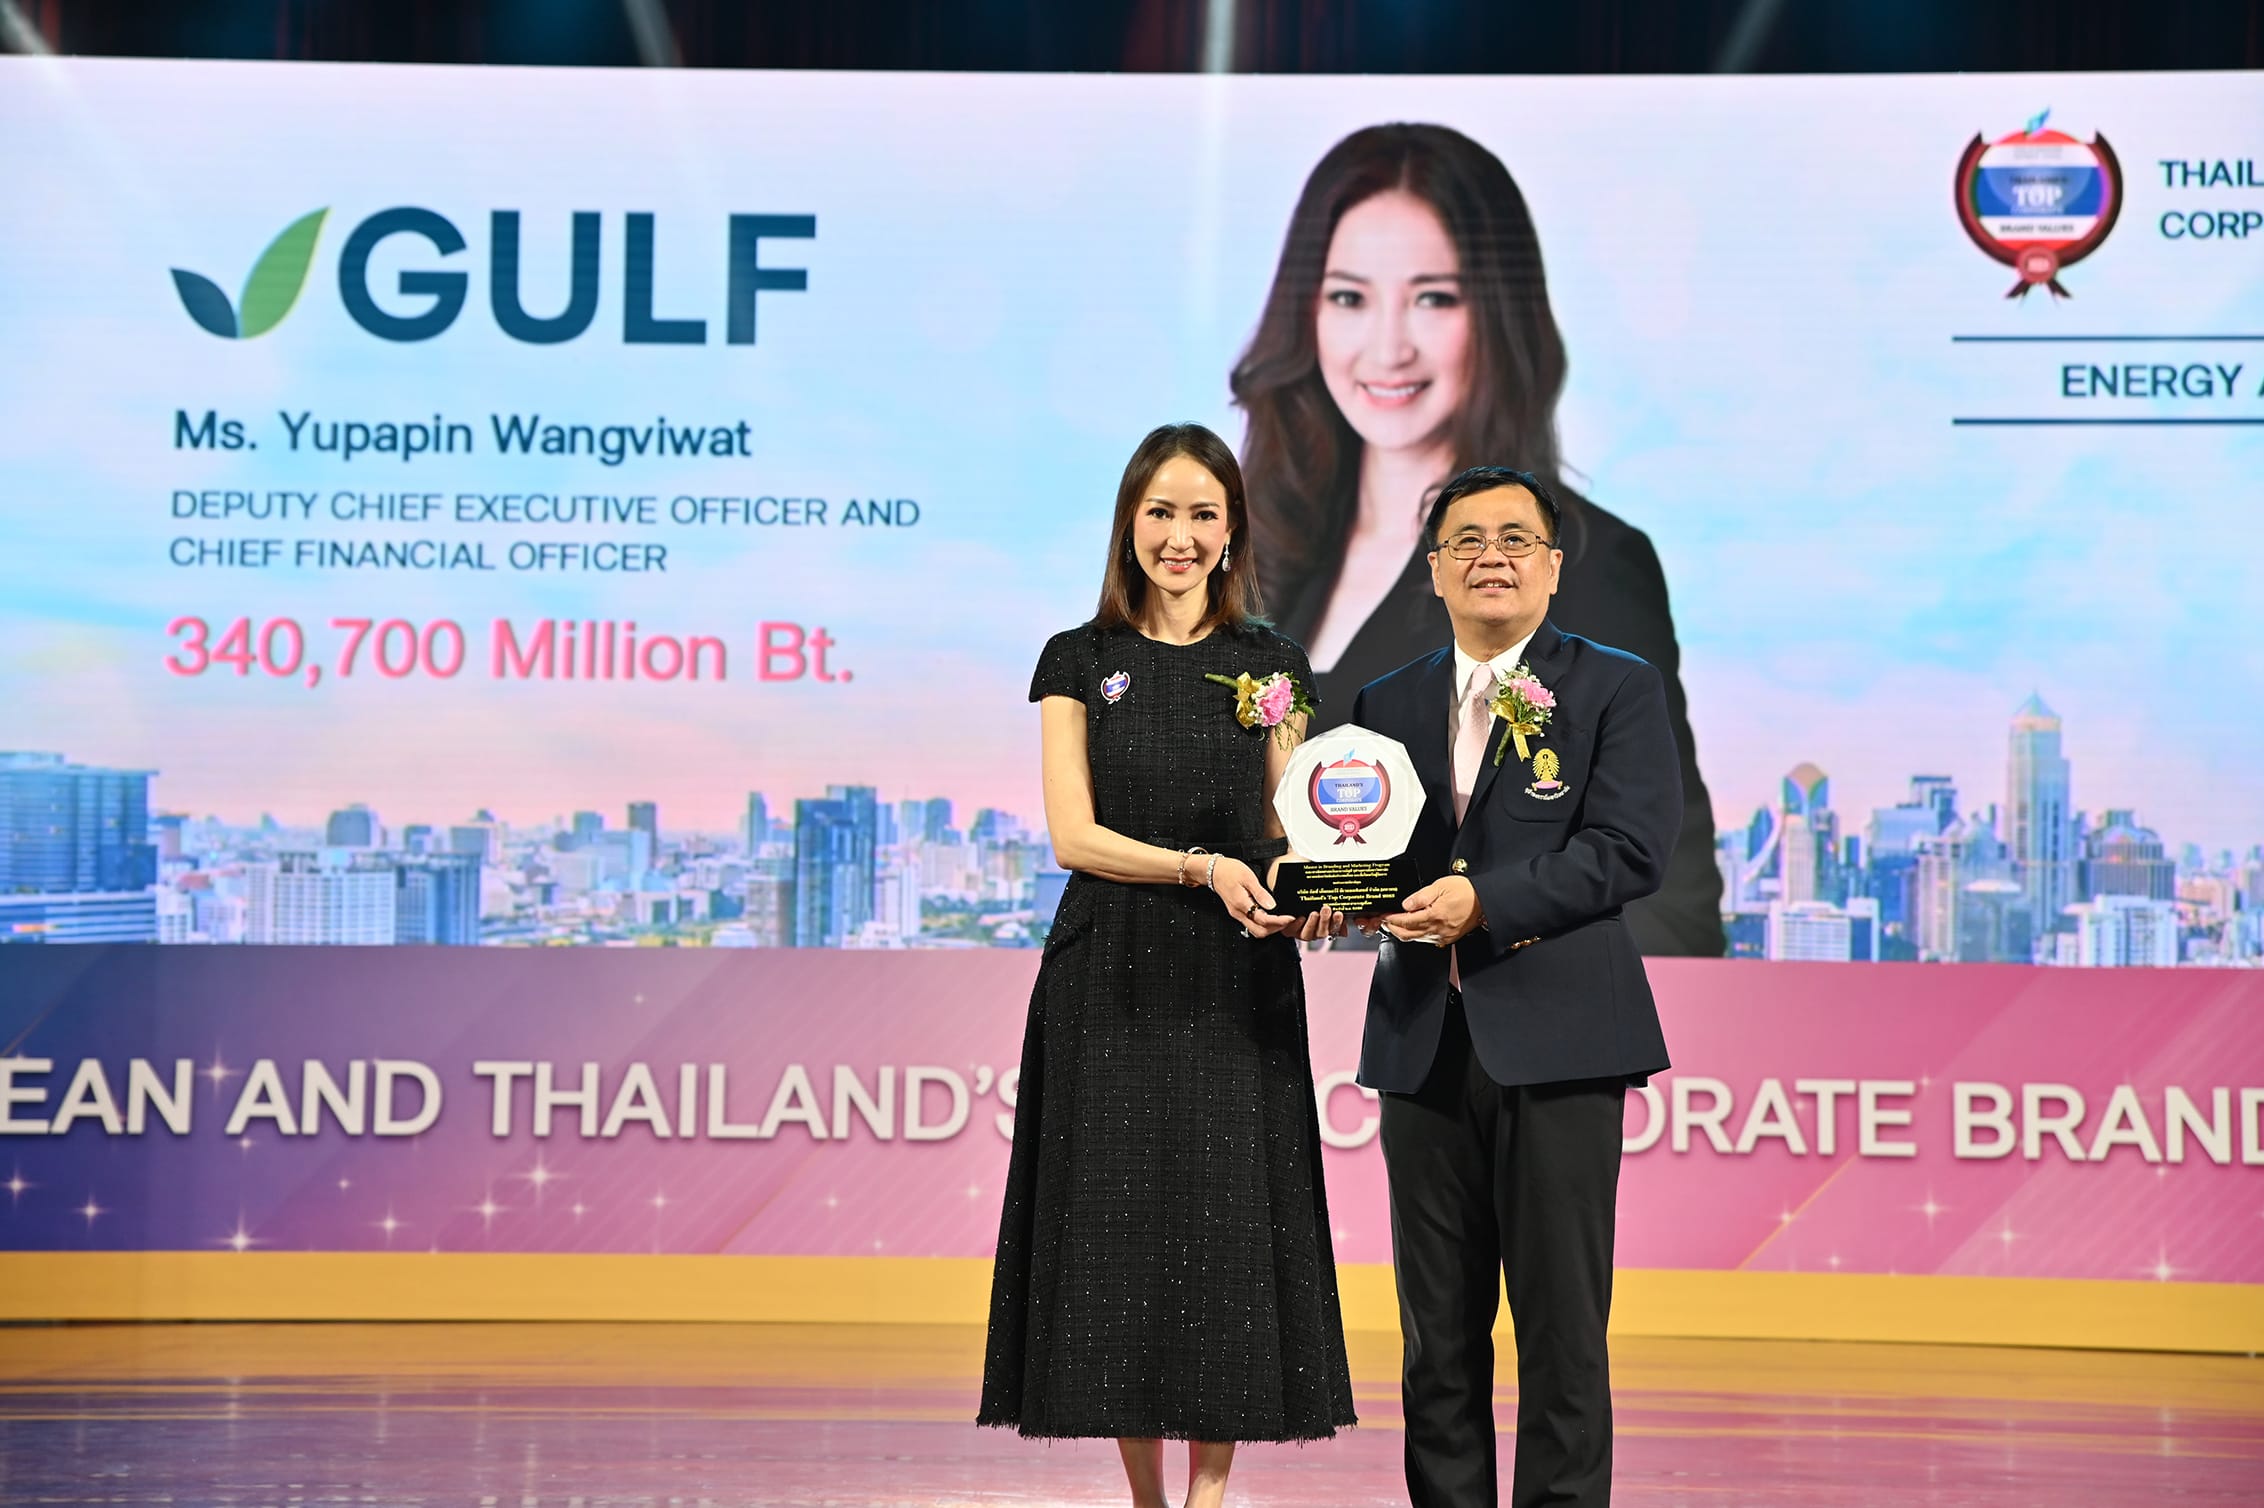 GULF ASEAN and Thailand's Top Corporate Brands 2023